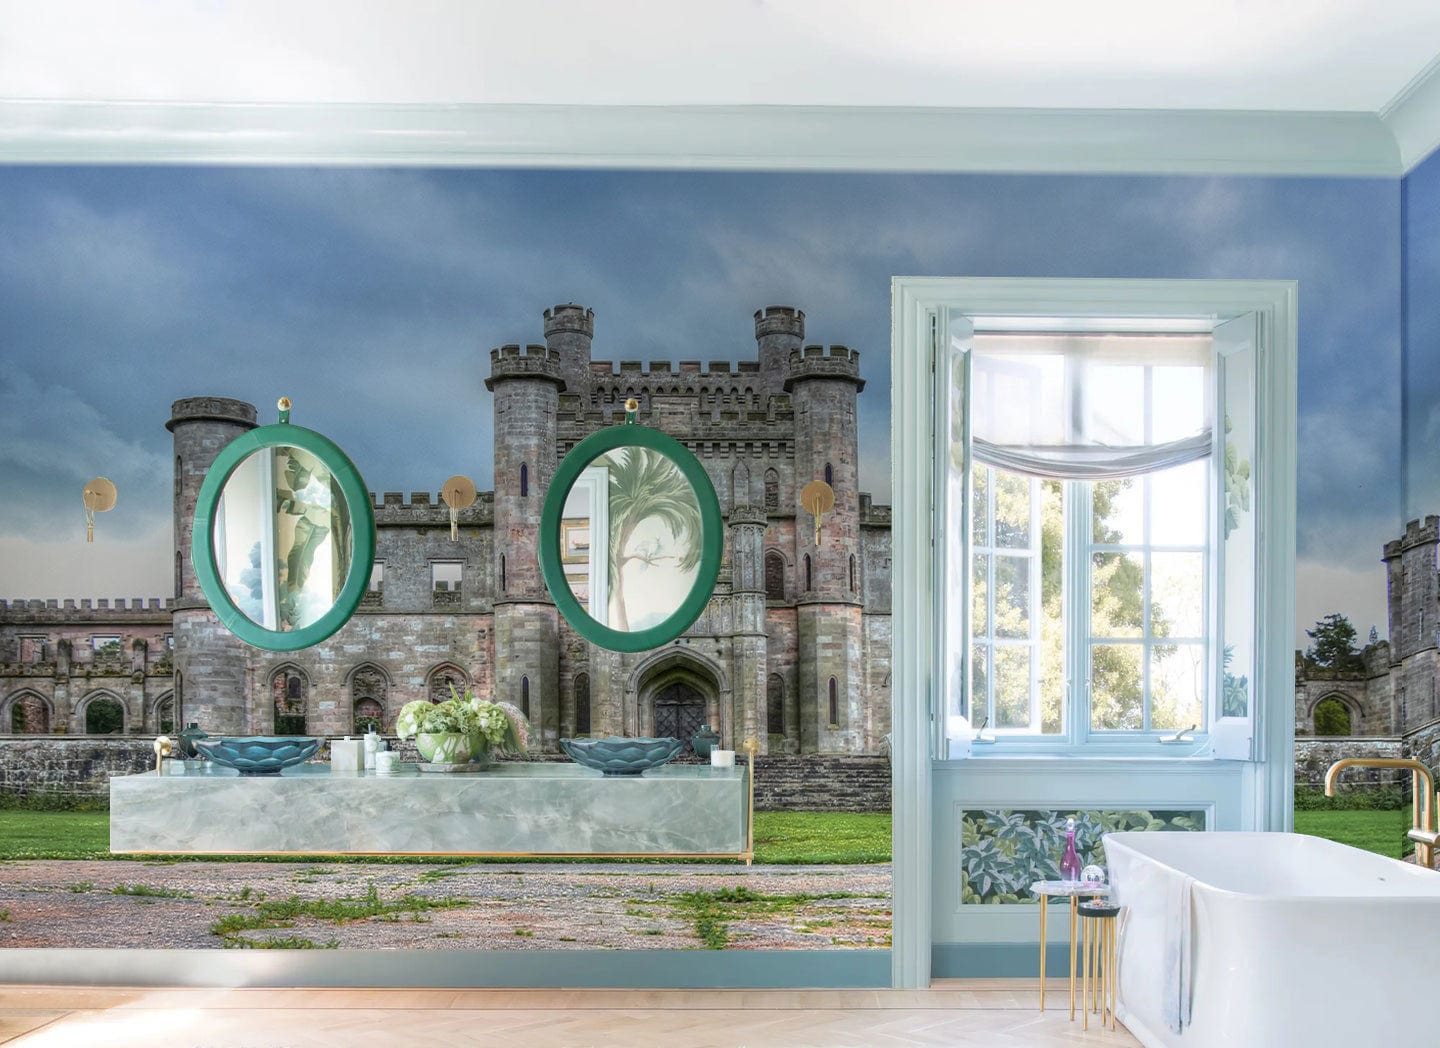 Wallpaper mural featuring an ancient scene of Lowther Castle, ideal for use as bathroom decor.